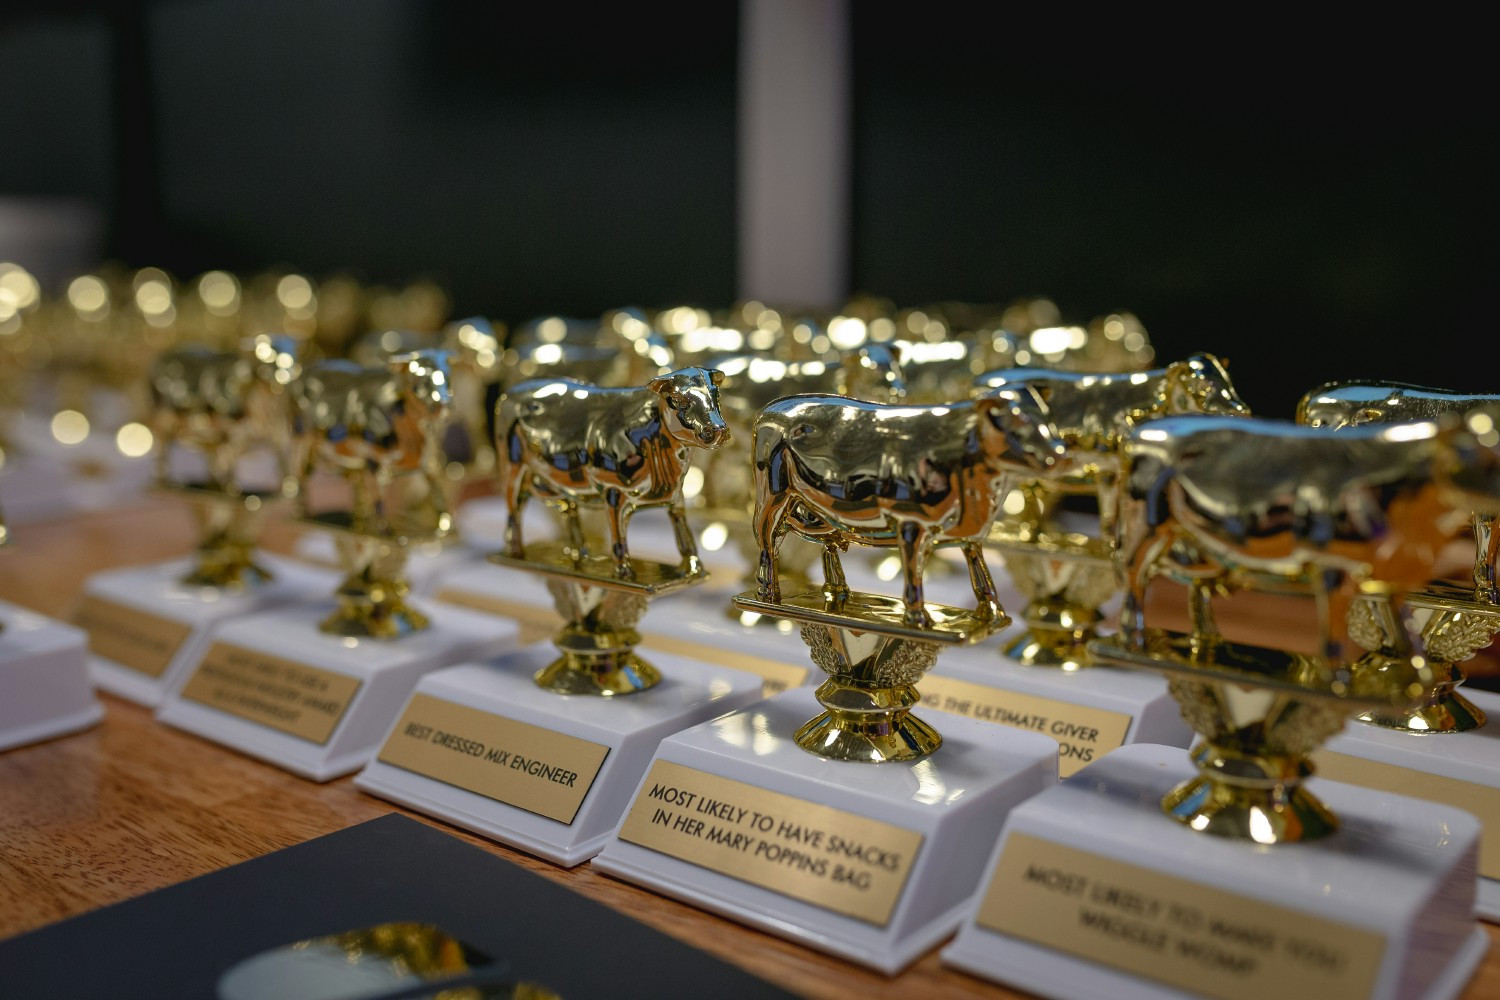 Soundstripe employee recognition awards